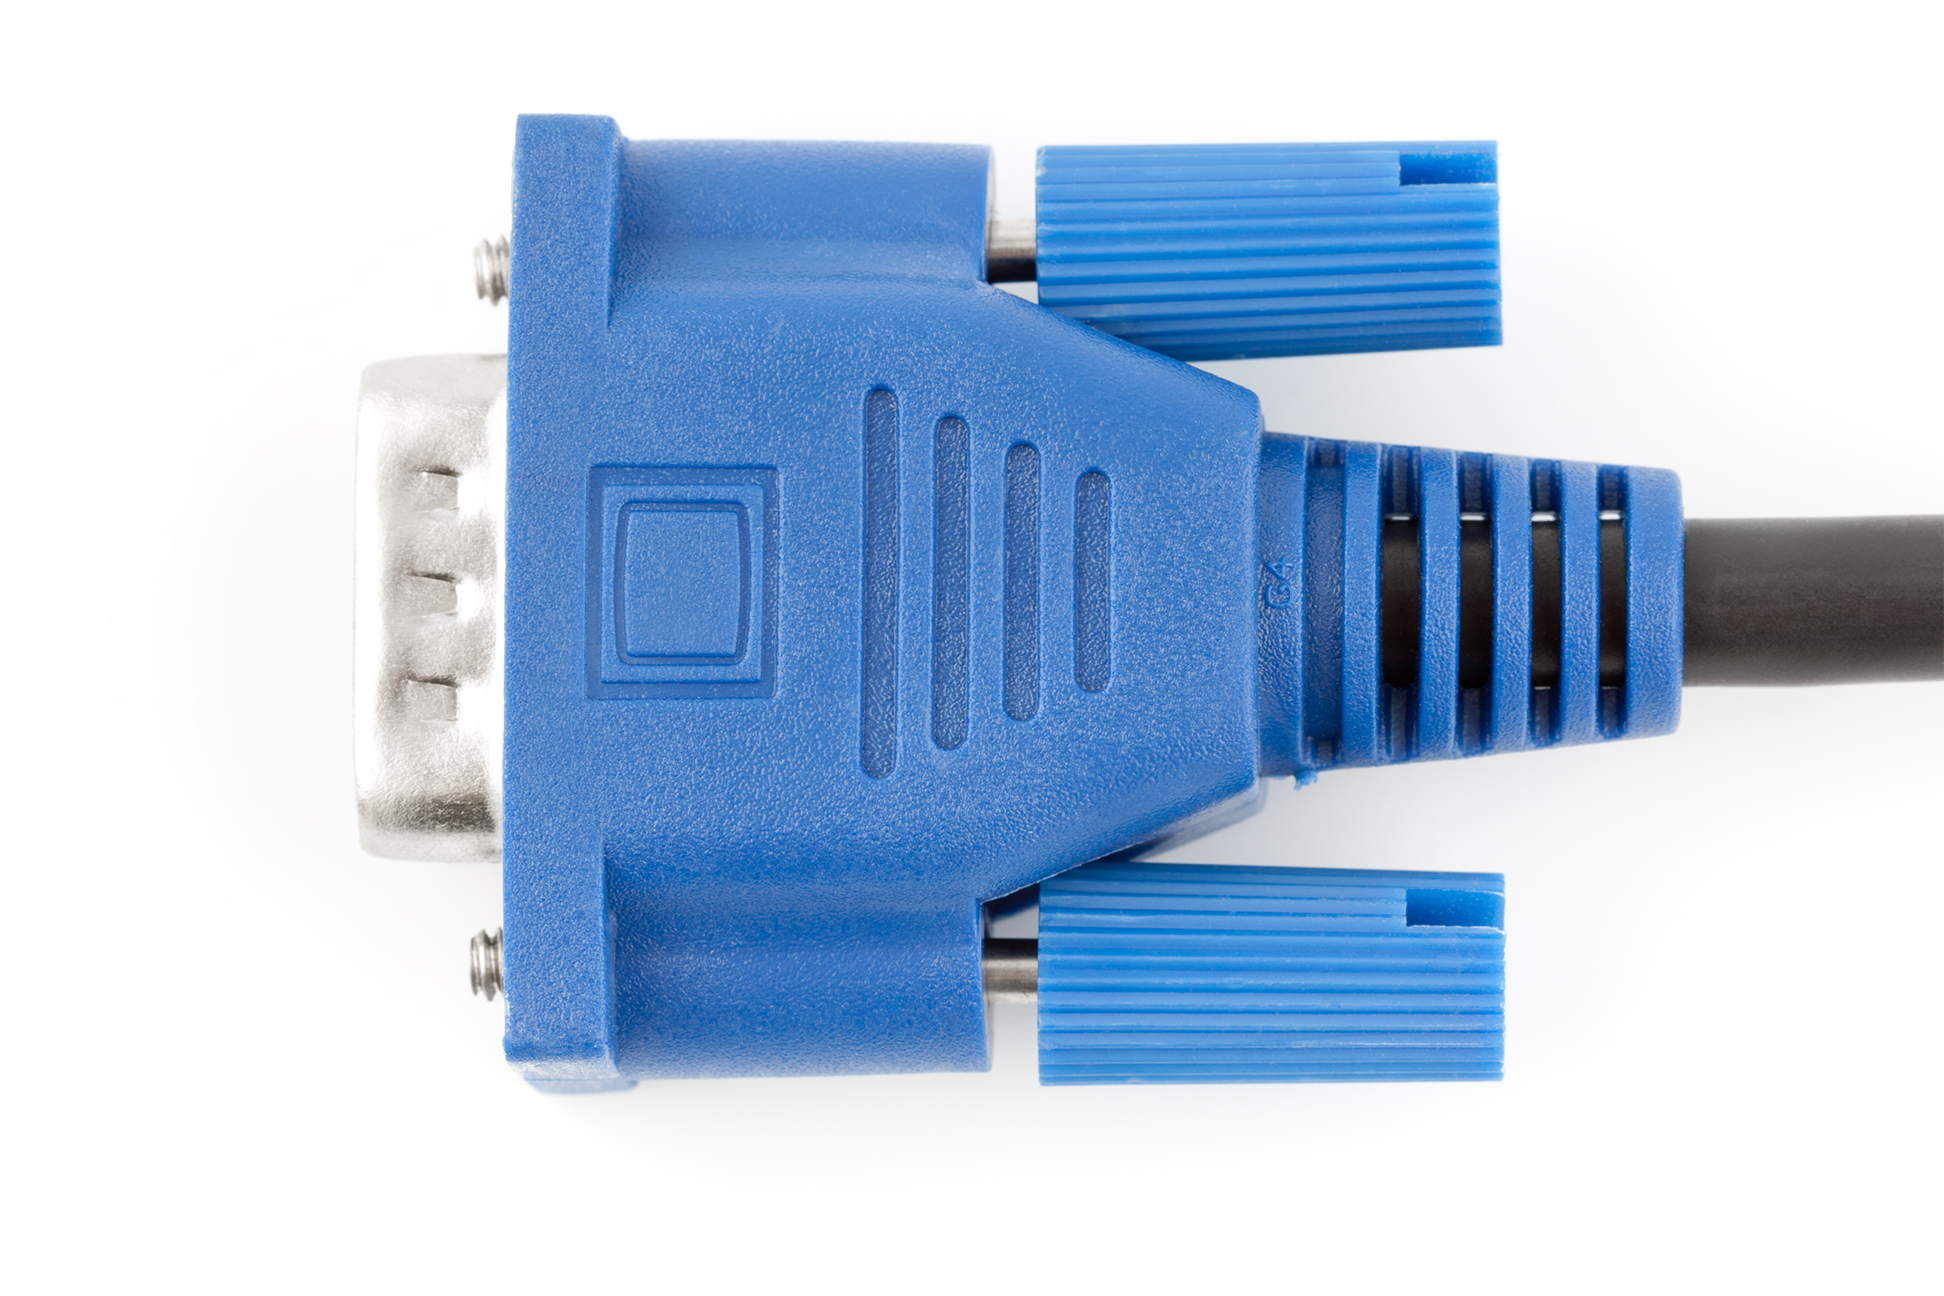 File:Male VGA connector, side view.jpg - Wikimedia Commons